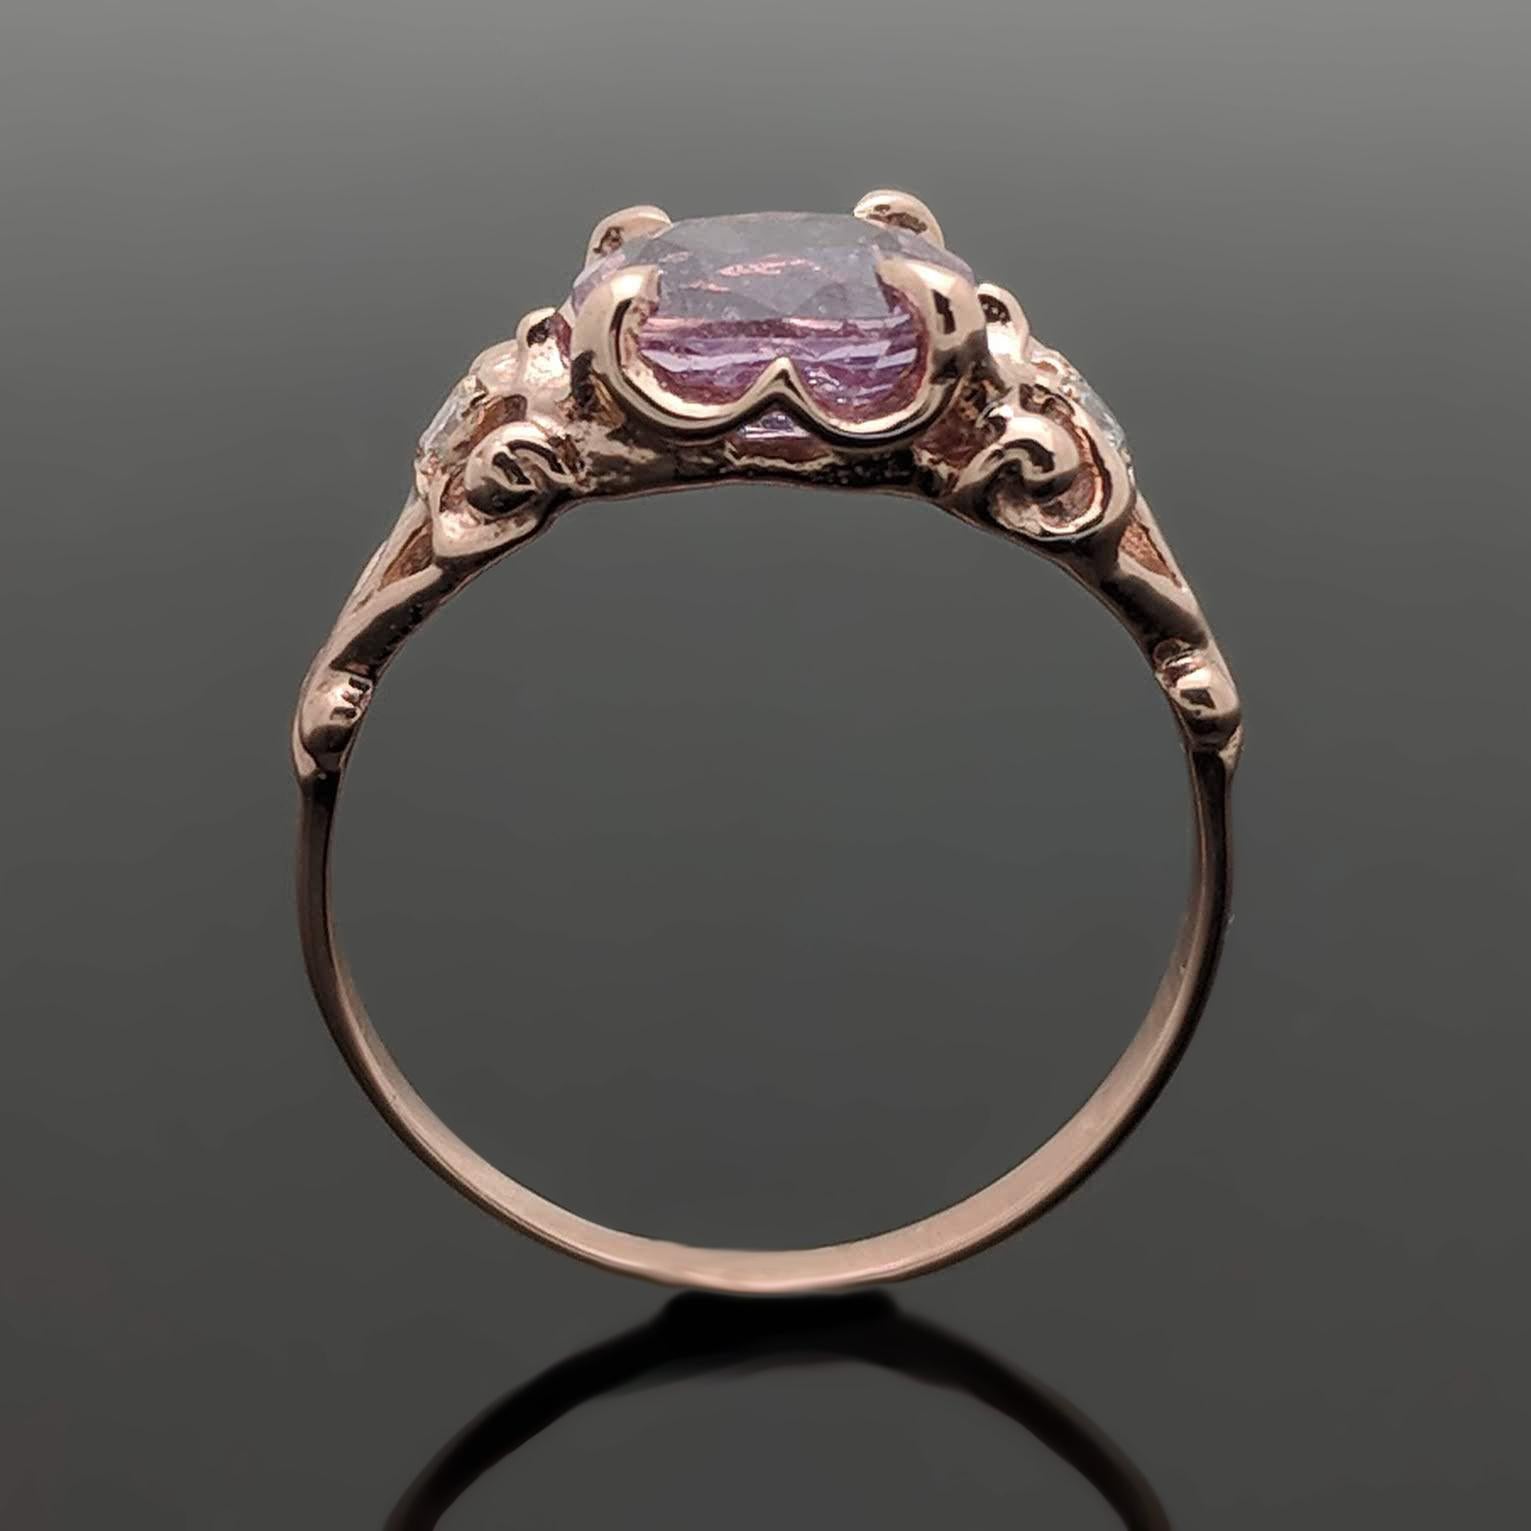 This 14kt rose gold ring is set with a large oval, pink sapphire with an estimated weight of 1.67ct. with 4 claw prongs. The detail includes a diamond on each side with an estimated 0.02 cttw. Estimated weight of gold is 1 gr. 

We will size it for